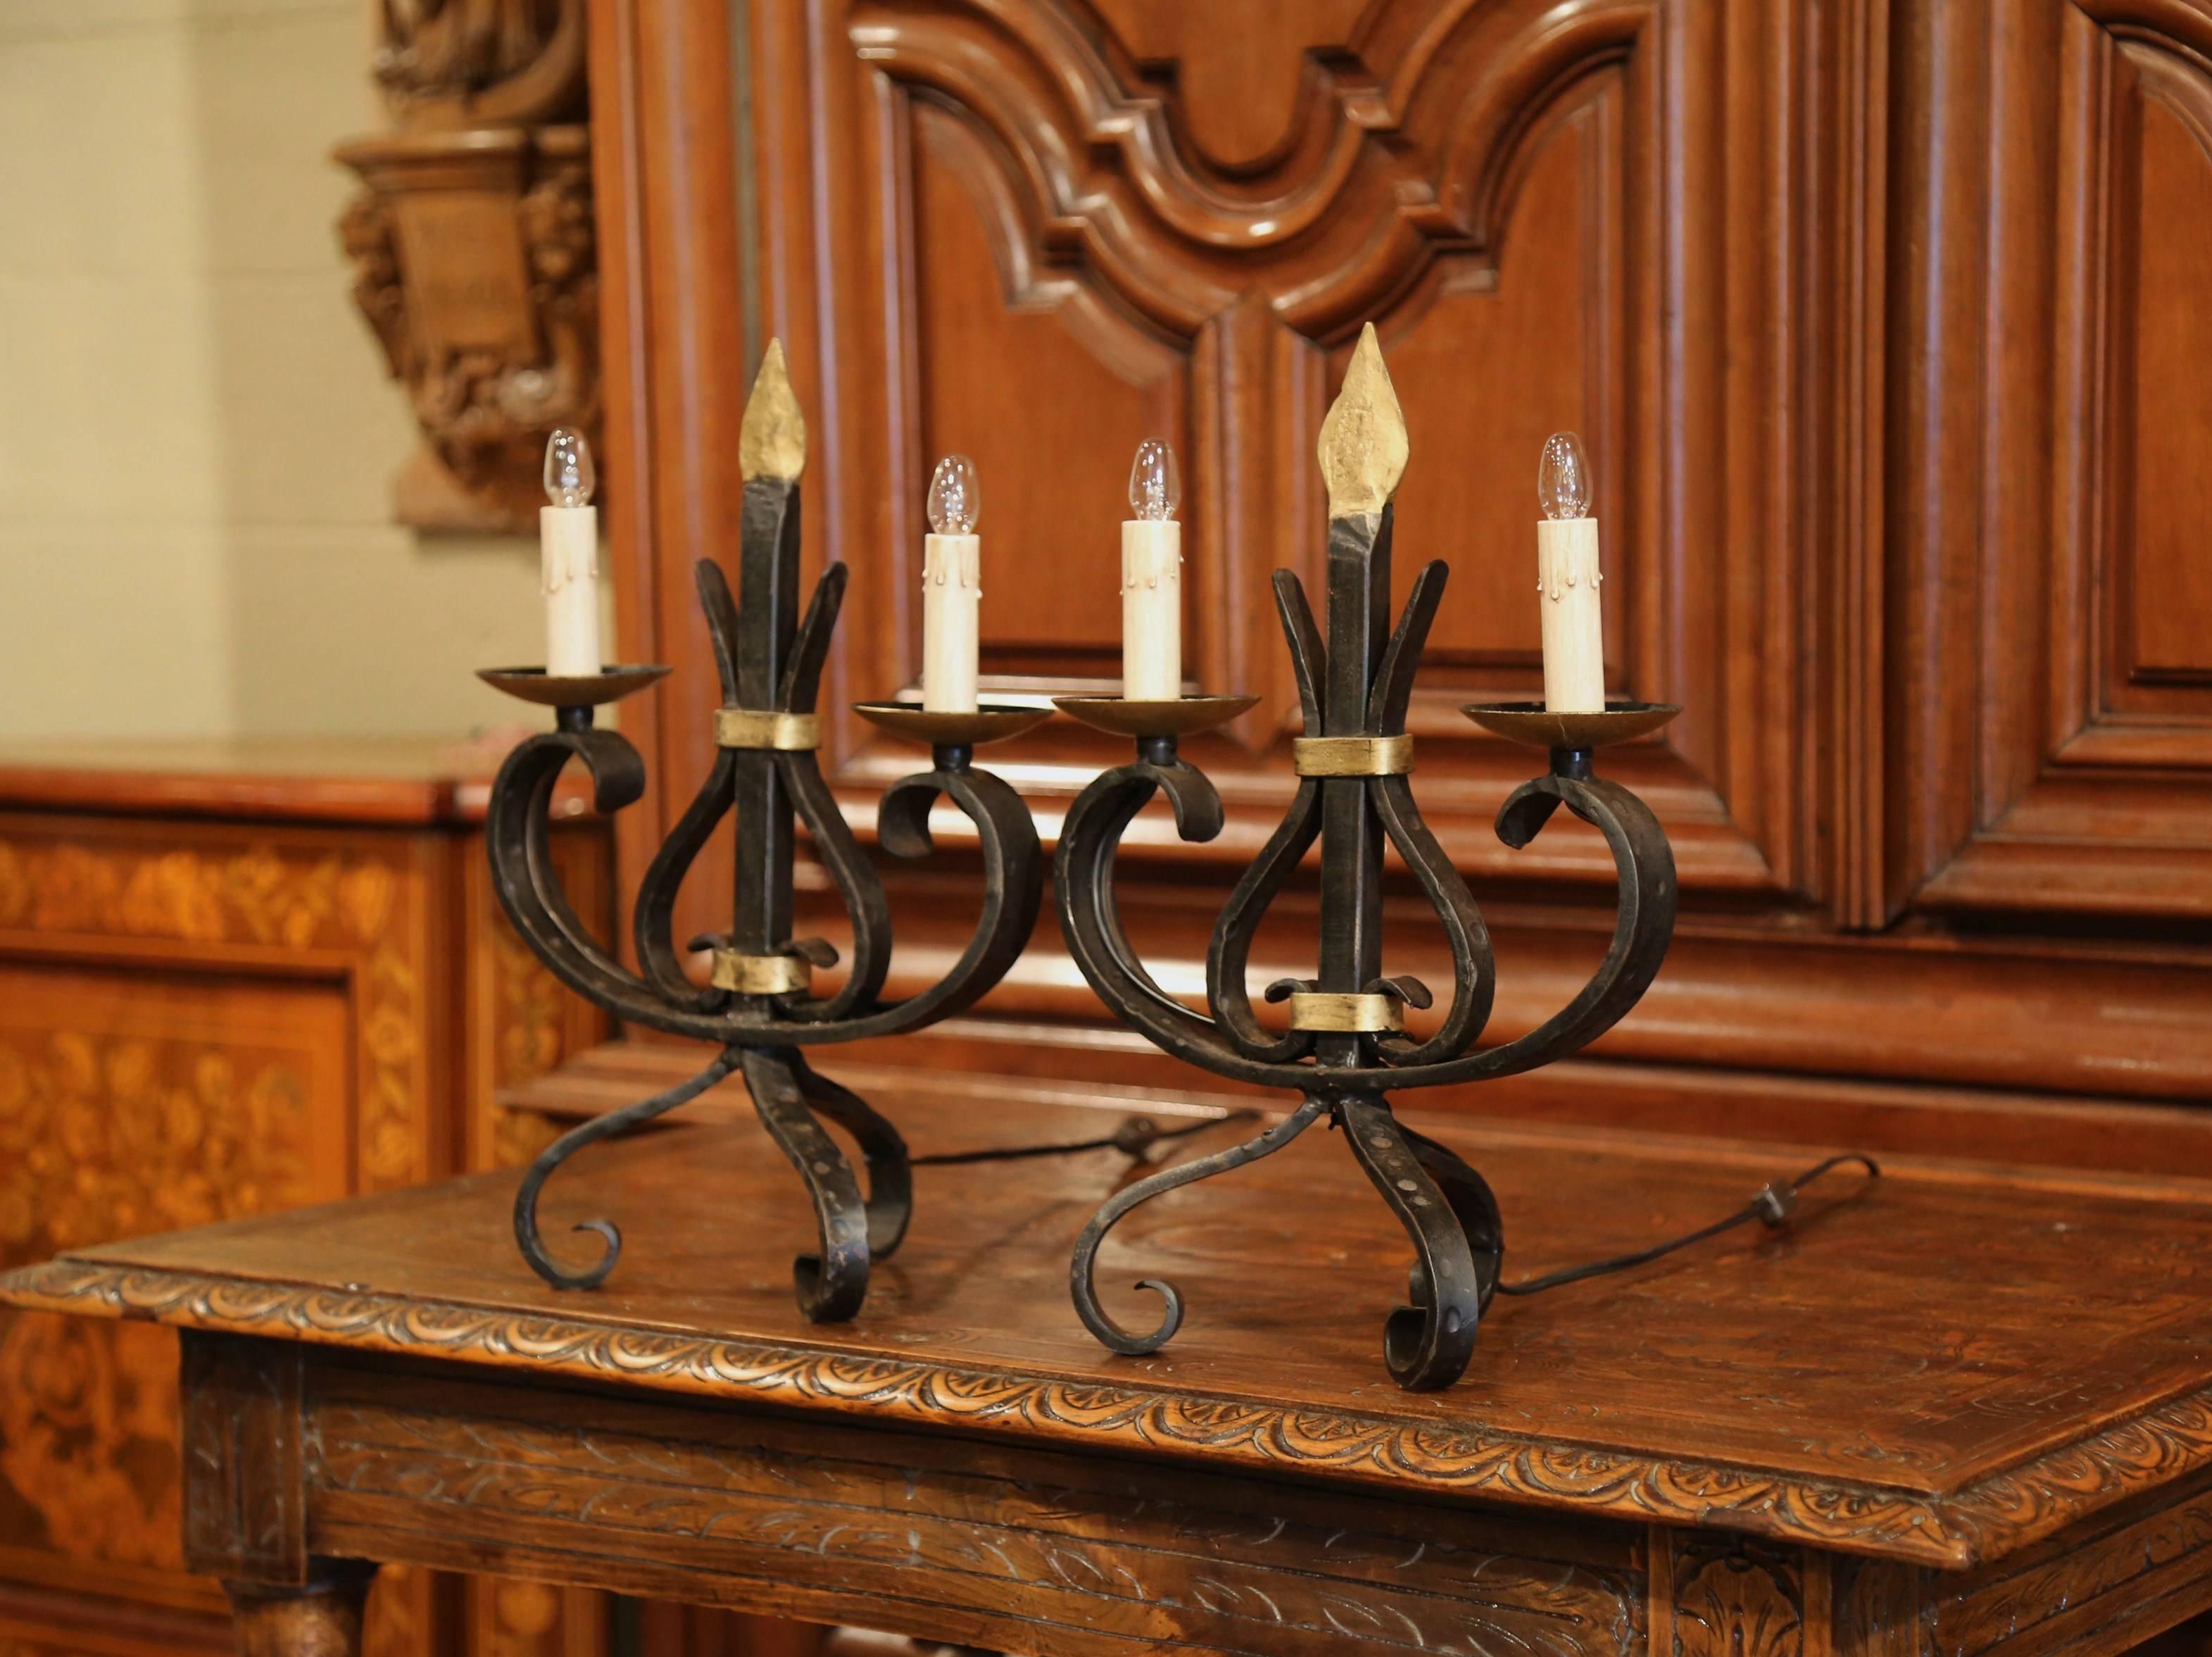 Elegant pair of antique Gothic candelabras from Southern France, crafted circa 1920, the forged fixtures Stand on three curved legs, they have two lights newly wired with ornate iron work in the center. The free standing table lamps are in excellent